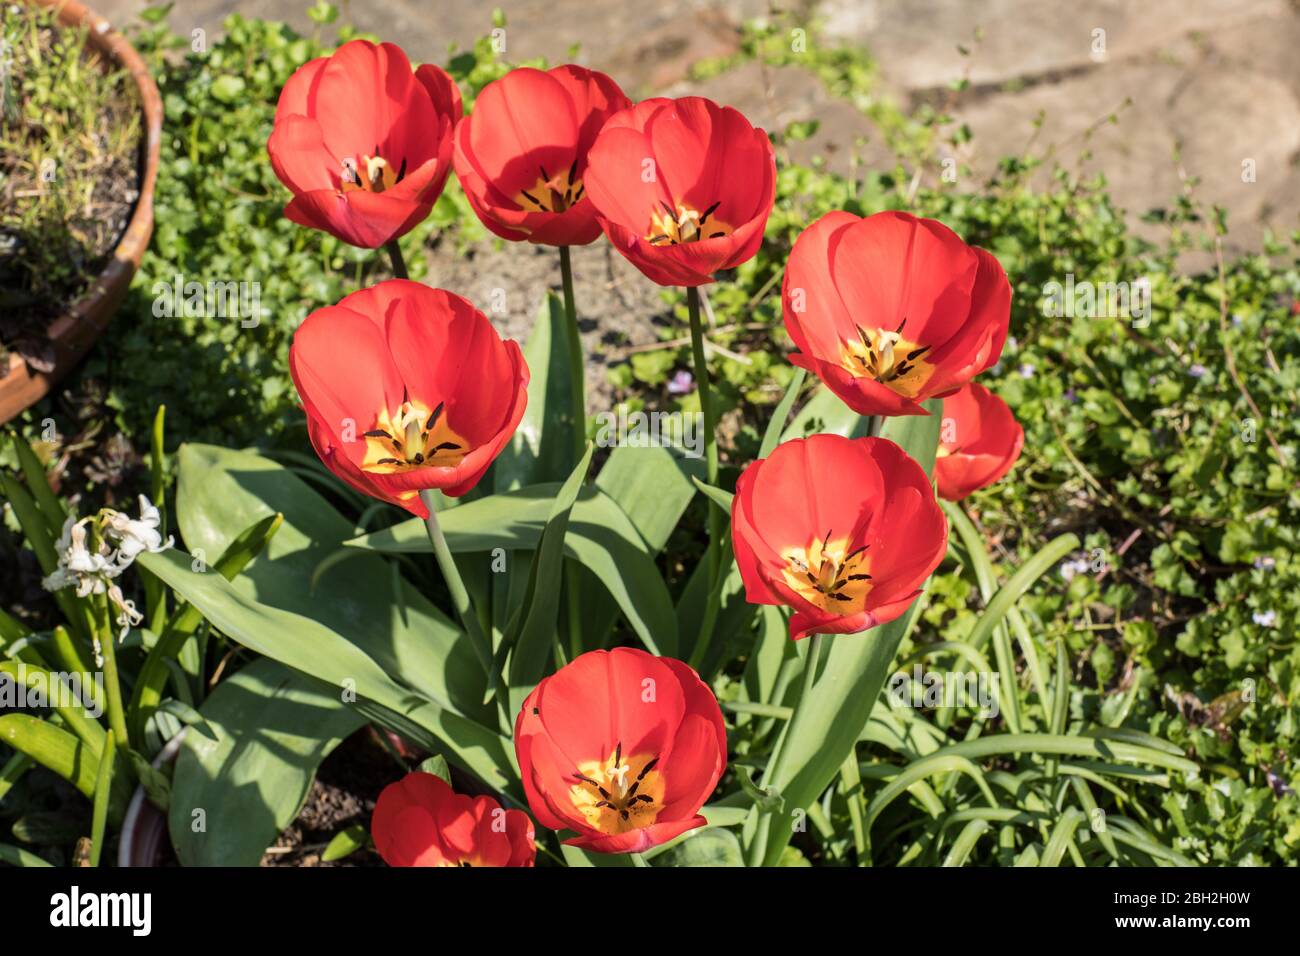 London, England. April, 2020. Beautiful red tulips with yellow centres creating vibrate spring colour in an English garden during a sunny spell in Apr Stock Photo